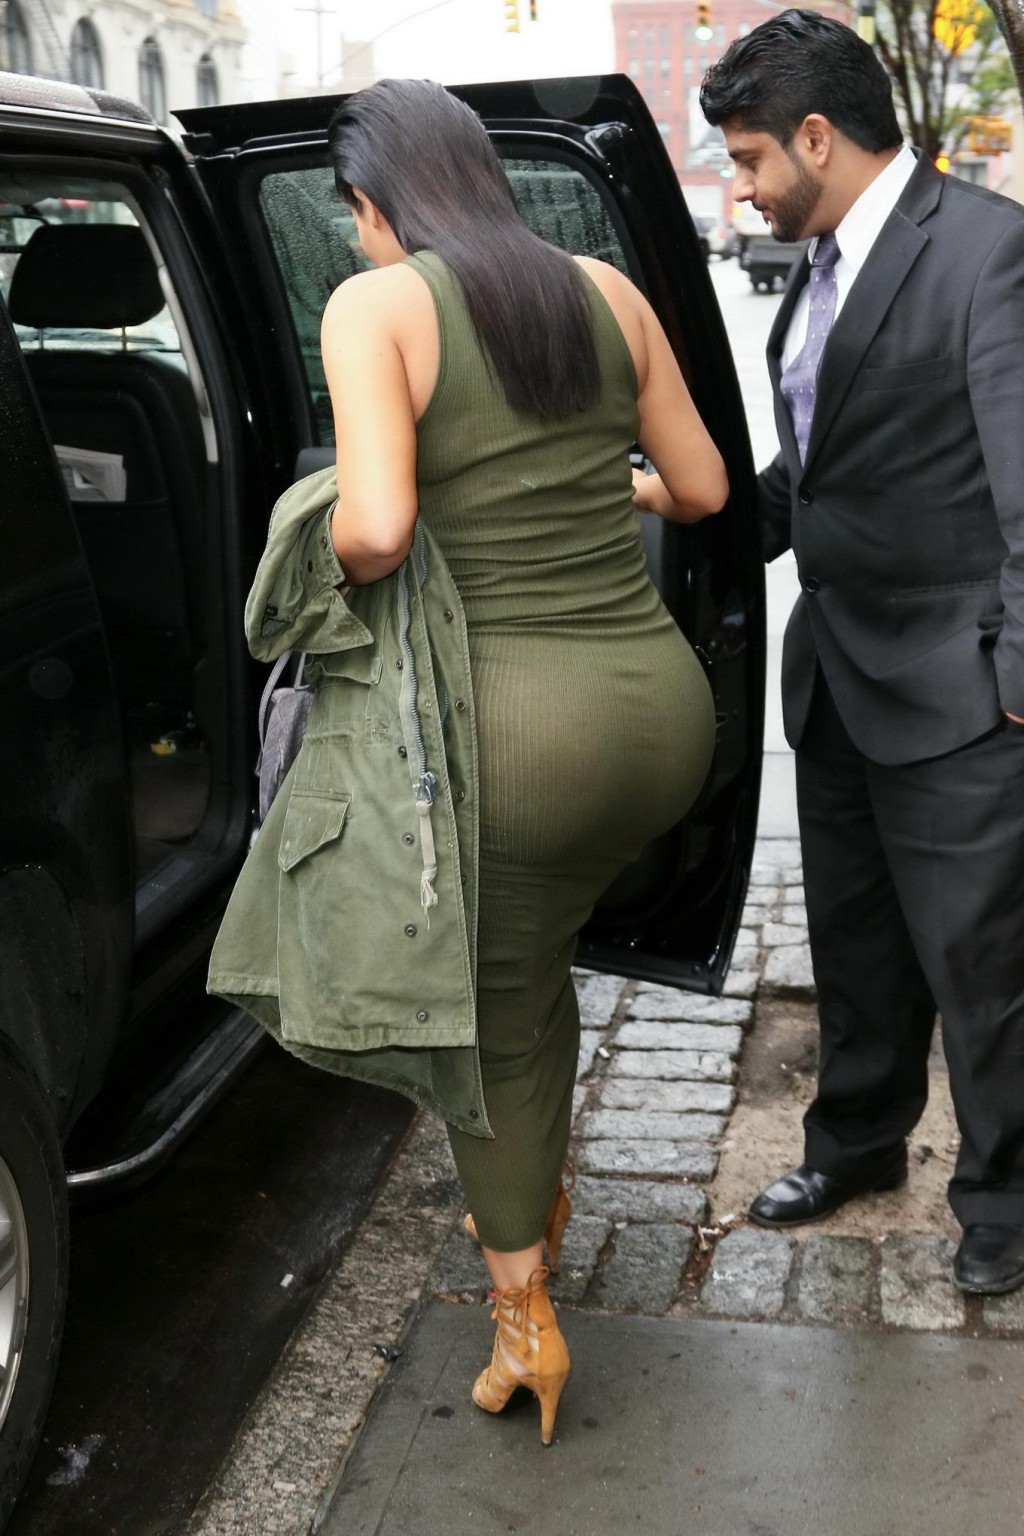 Kim Kardashian pantyless shows off her ass wearing a see through dress out in NY #75162171